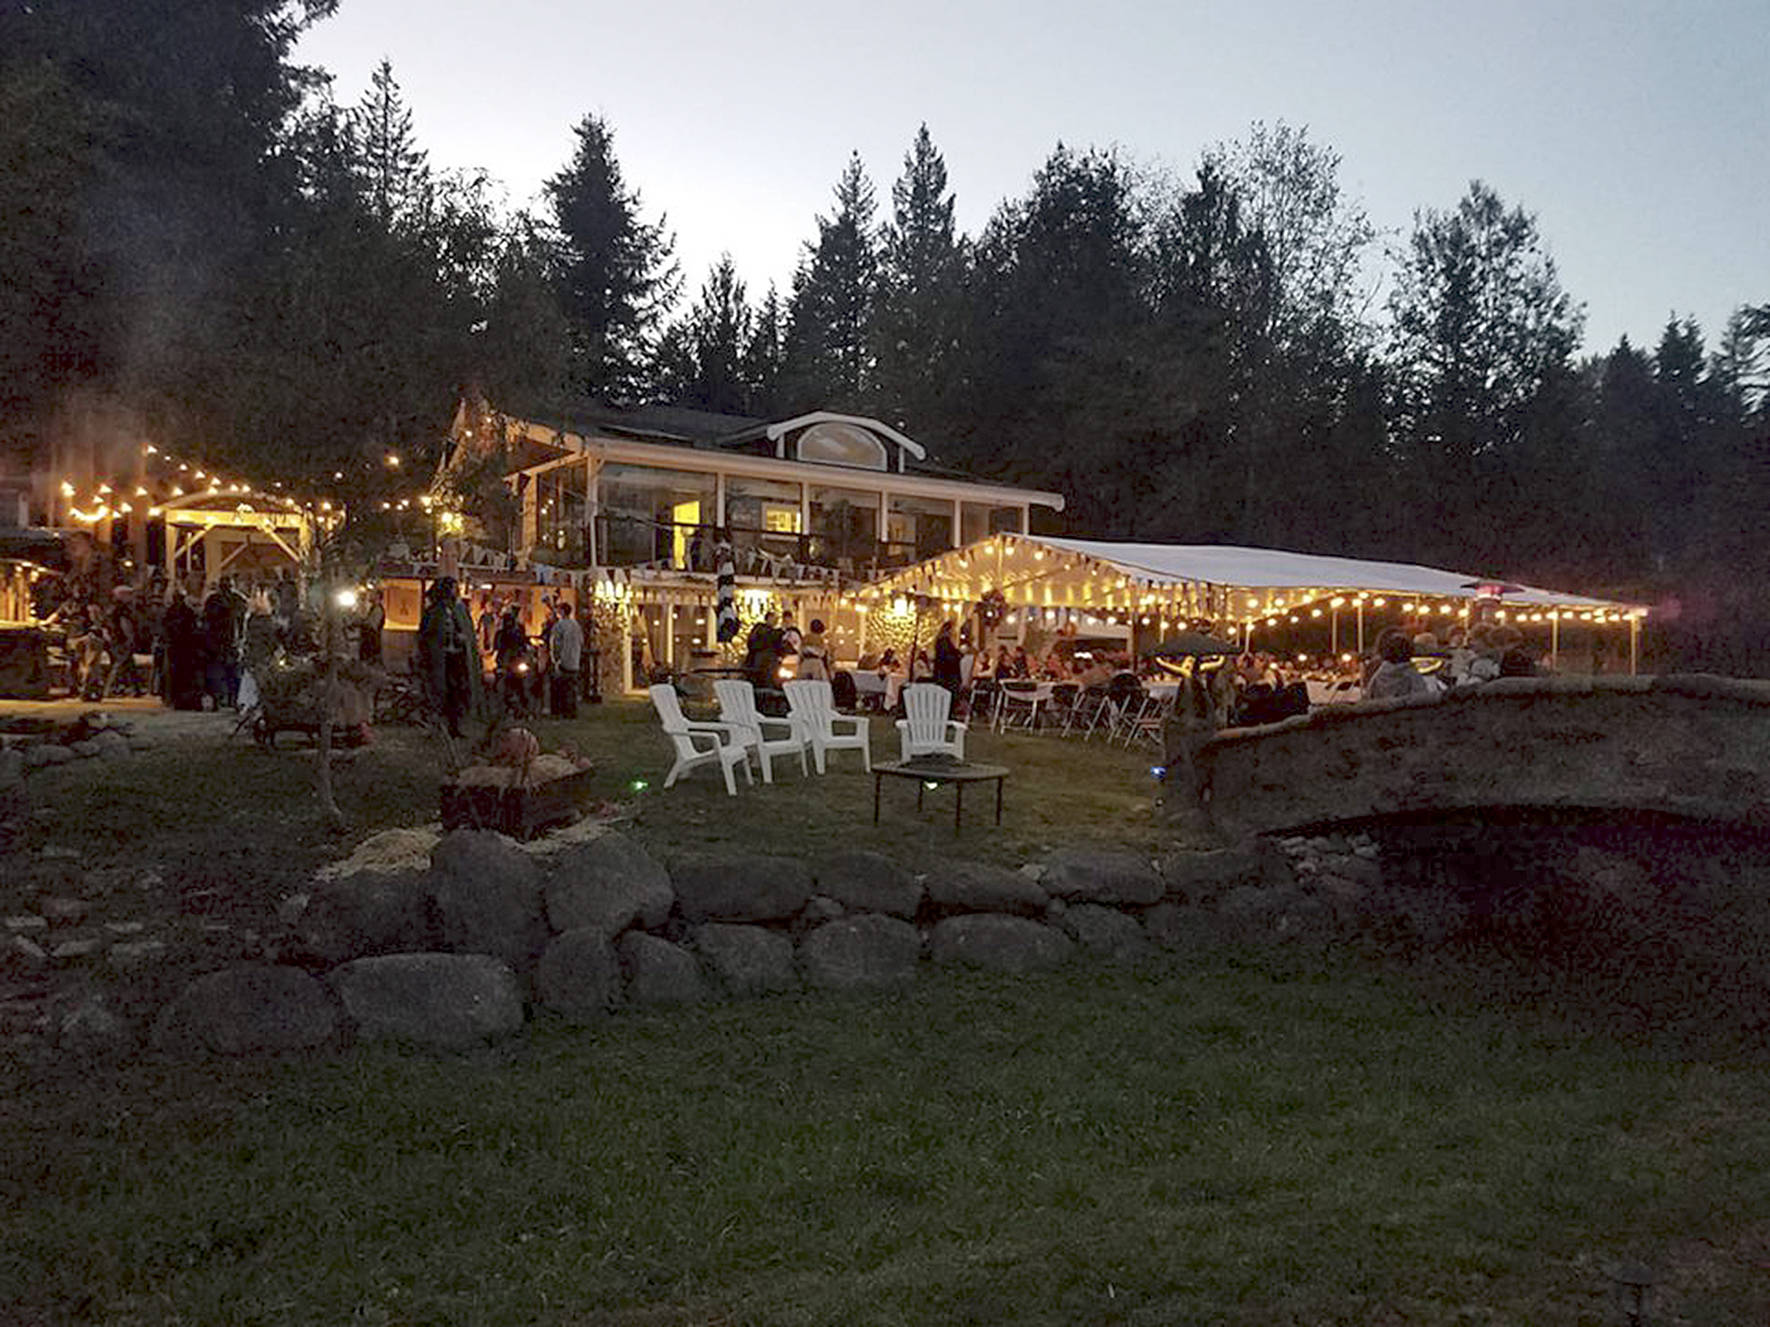 Photo courtesy of Heather Conti.                                 The Whit’s End Harvest Festival lights up the night as attendees of the Lord of the Rings themed event eat and be merry.